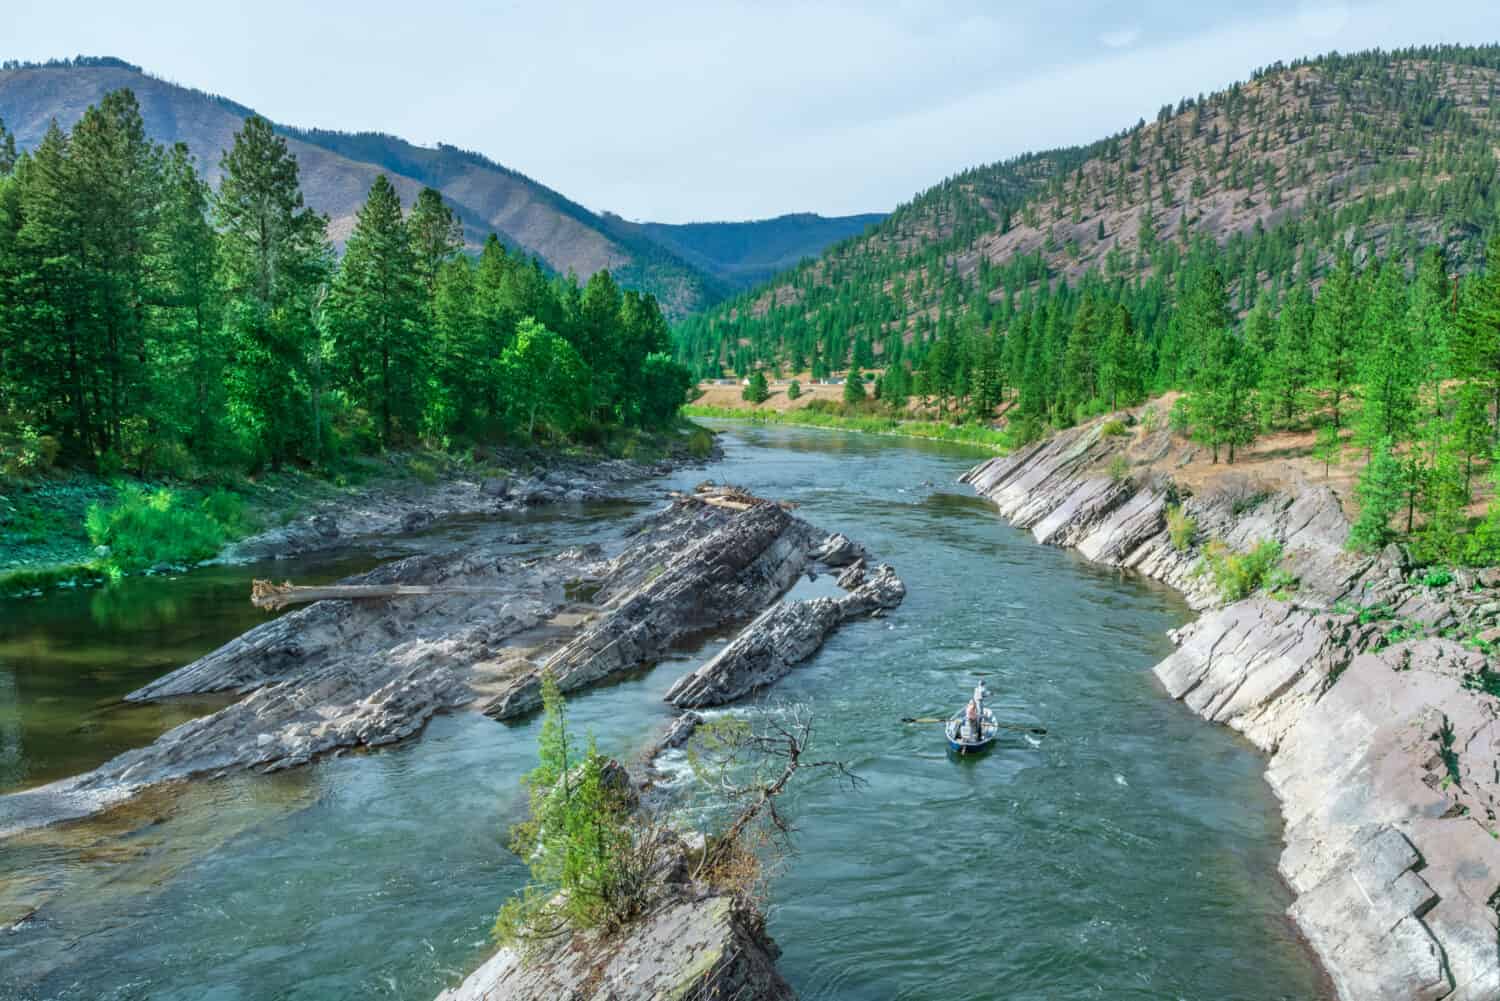 Best Fly fishing experience down the Montana in Alberton river gorge.